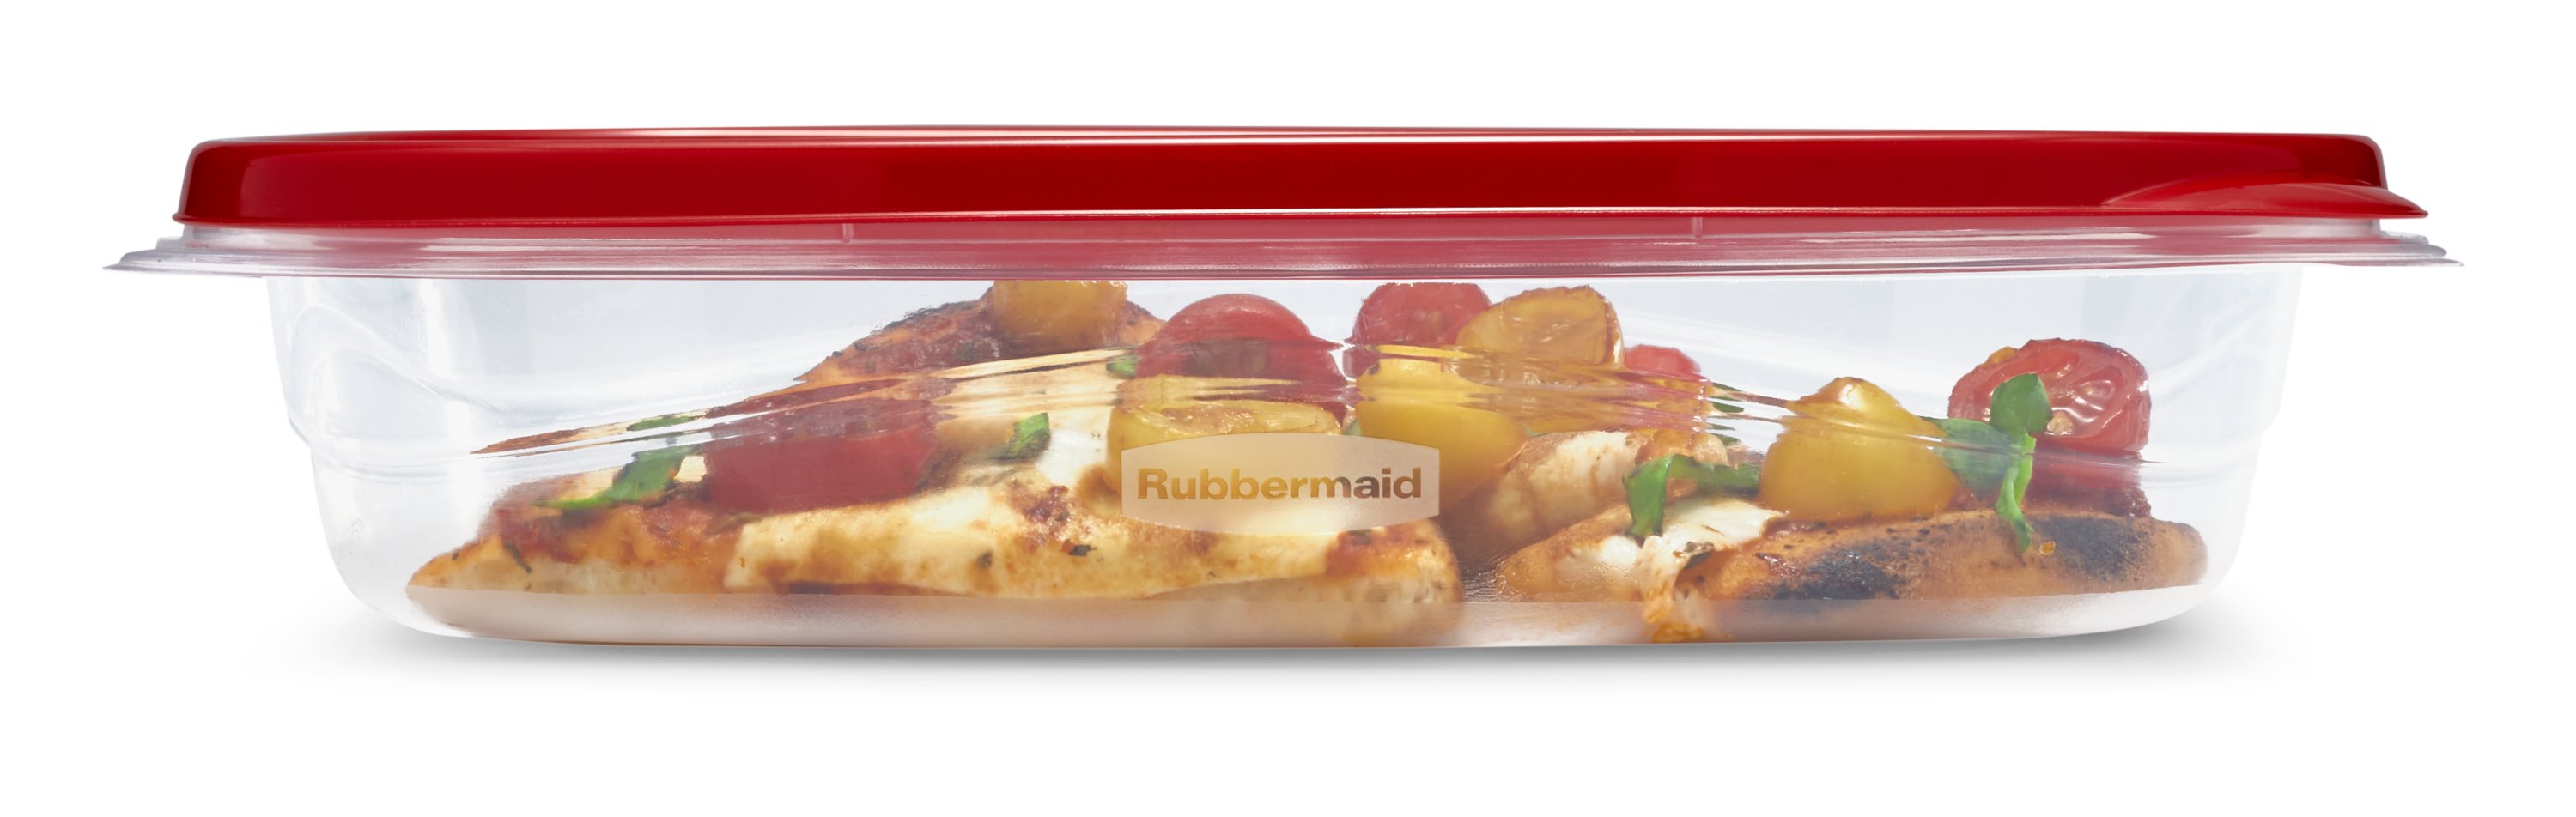 Rubbermaid 1787832 Rectangular Take Alongs Container 2 Piece Set, Pack of 2